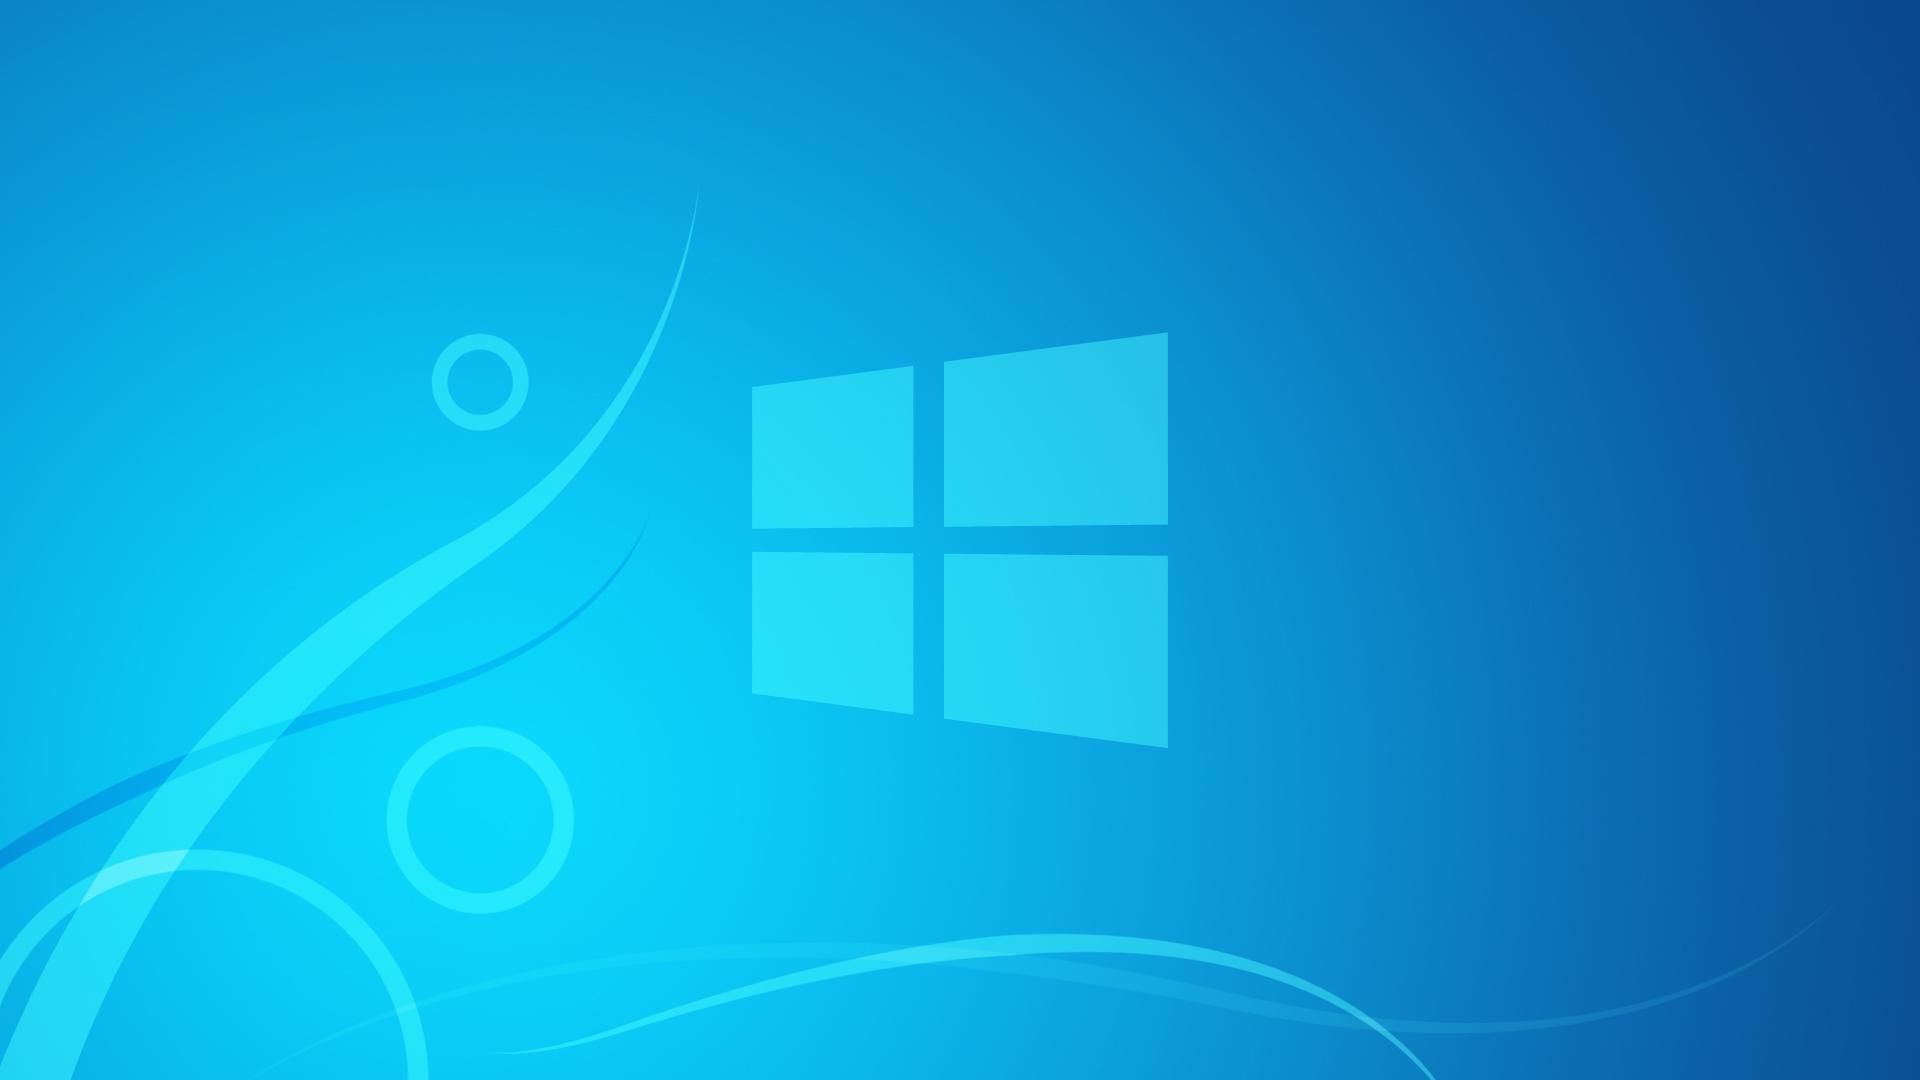 Best windows wallpapers download free high definition wallpapers of windows 8